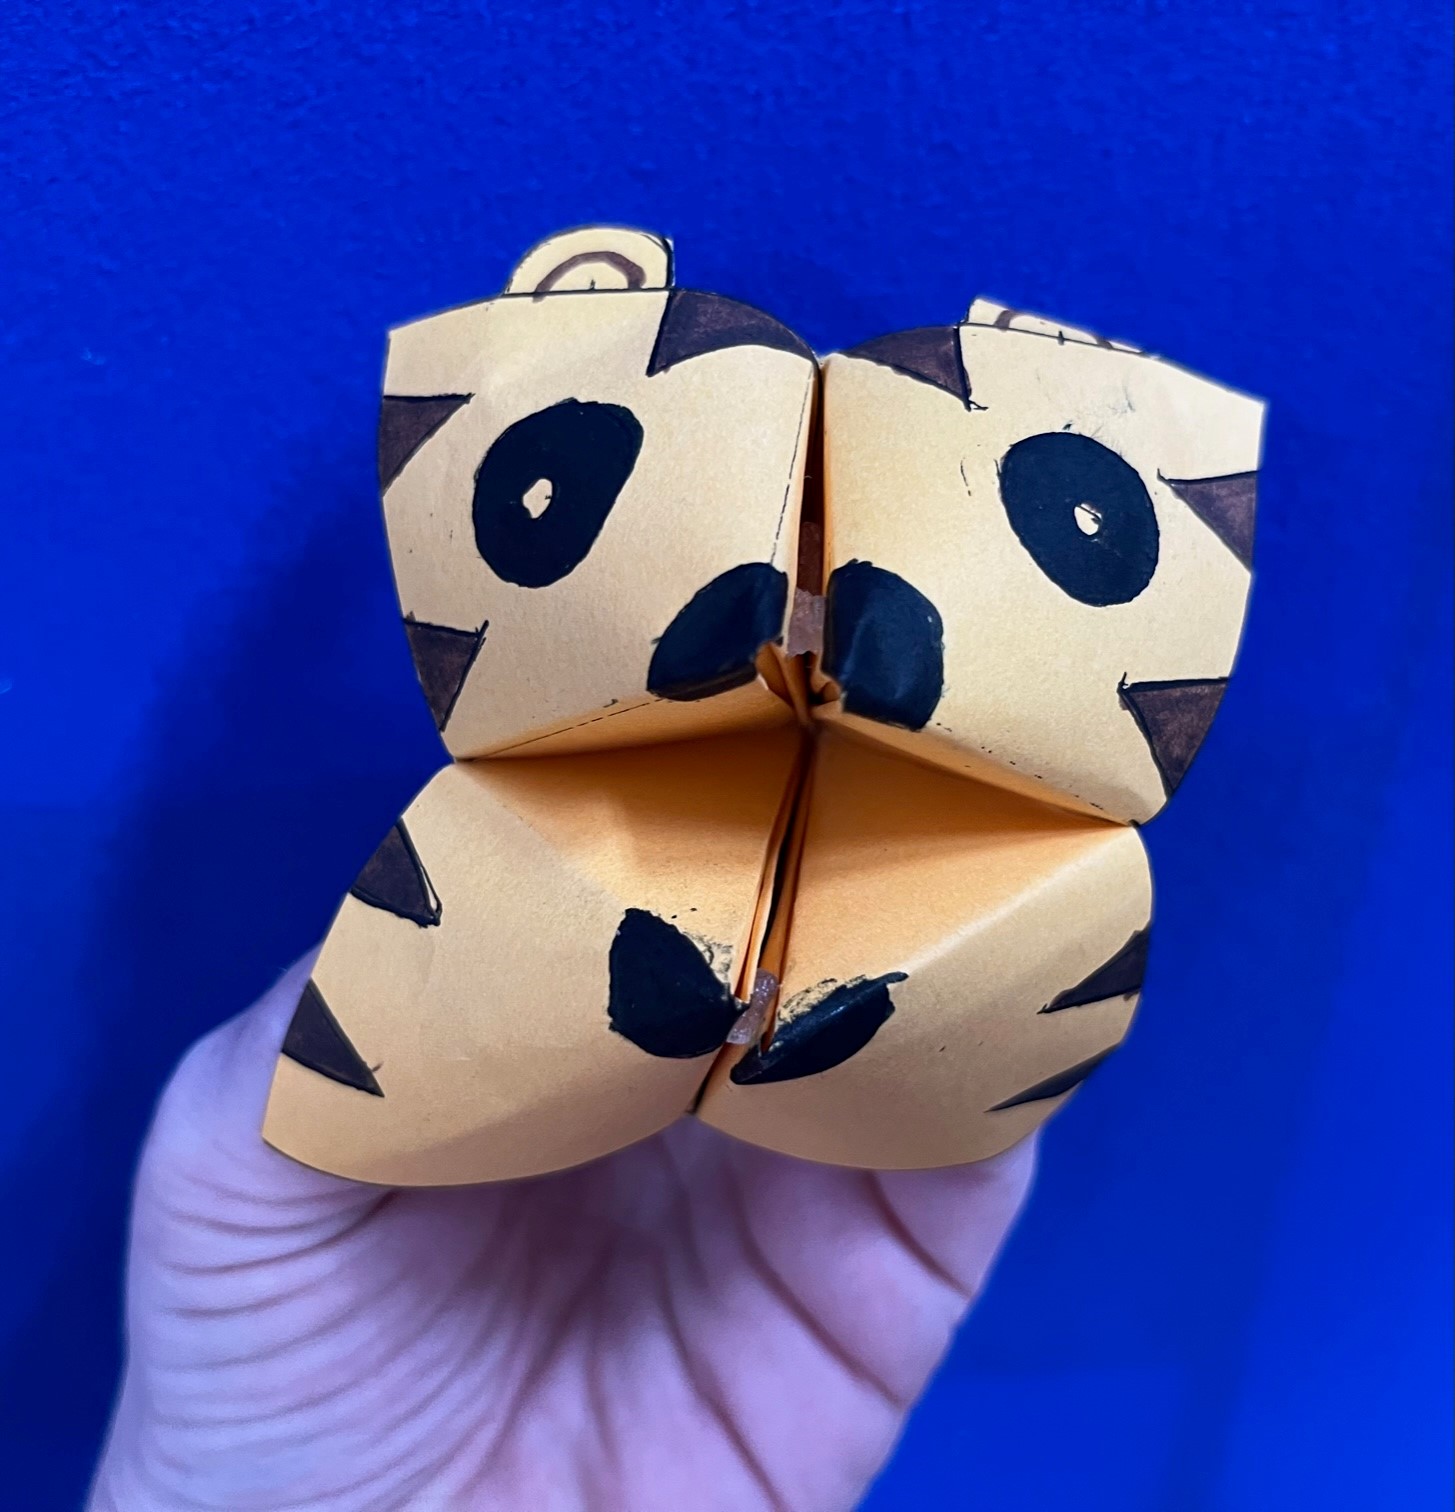 Zoo-themed crafts this week! Tiger